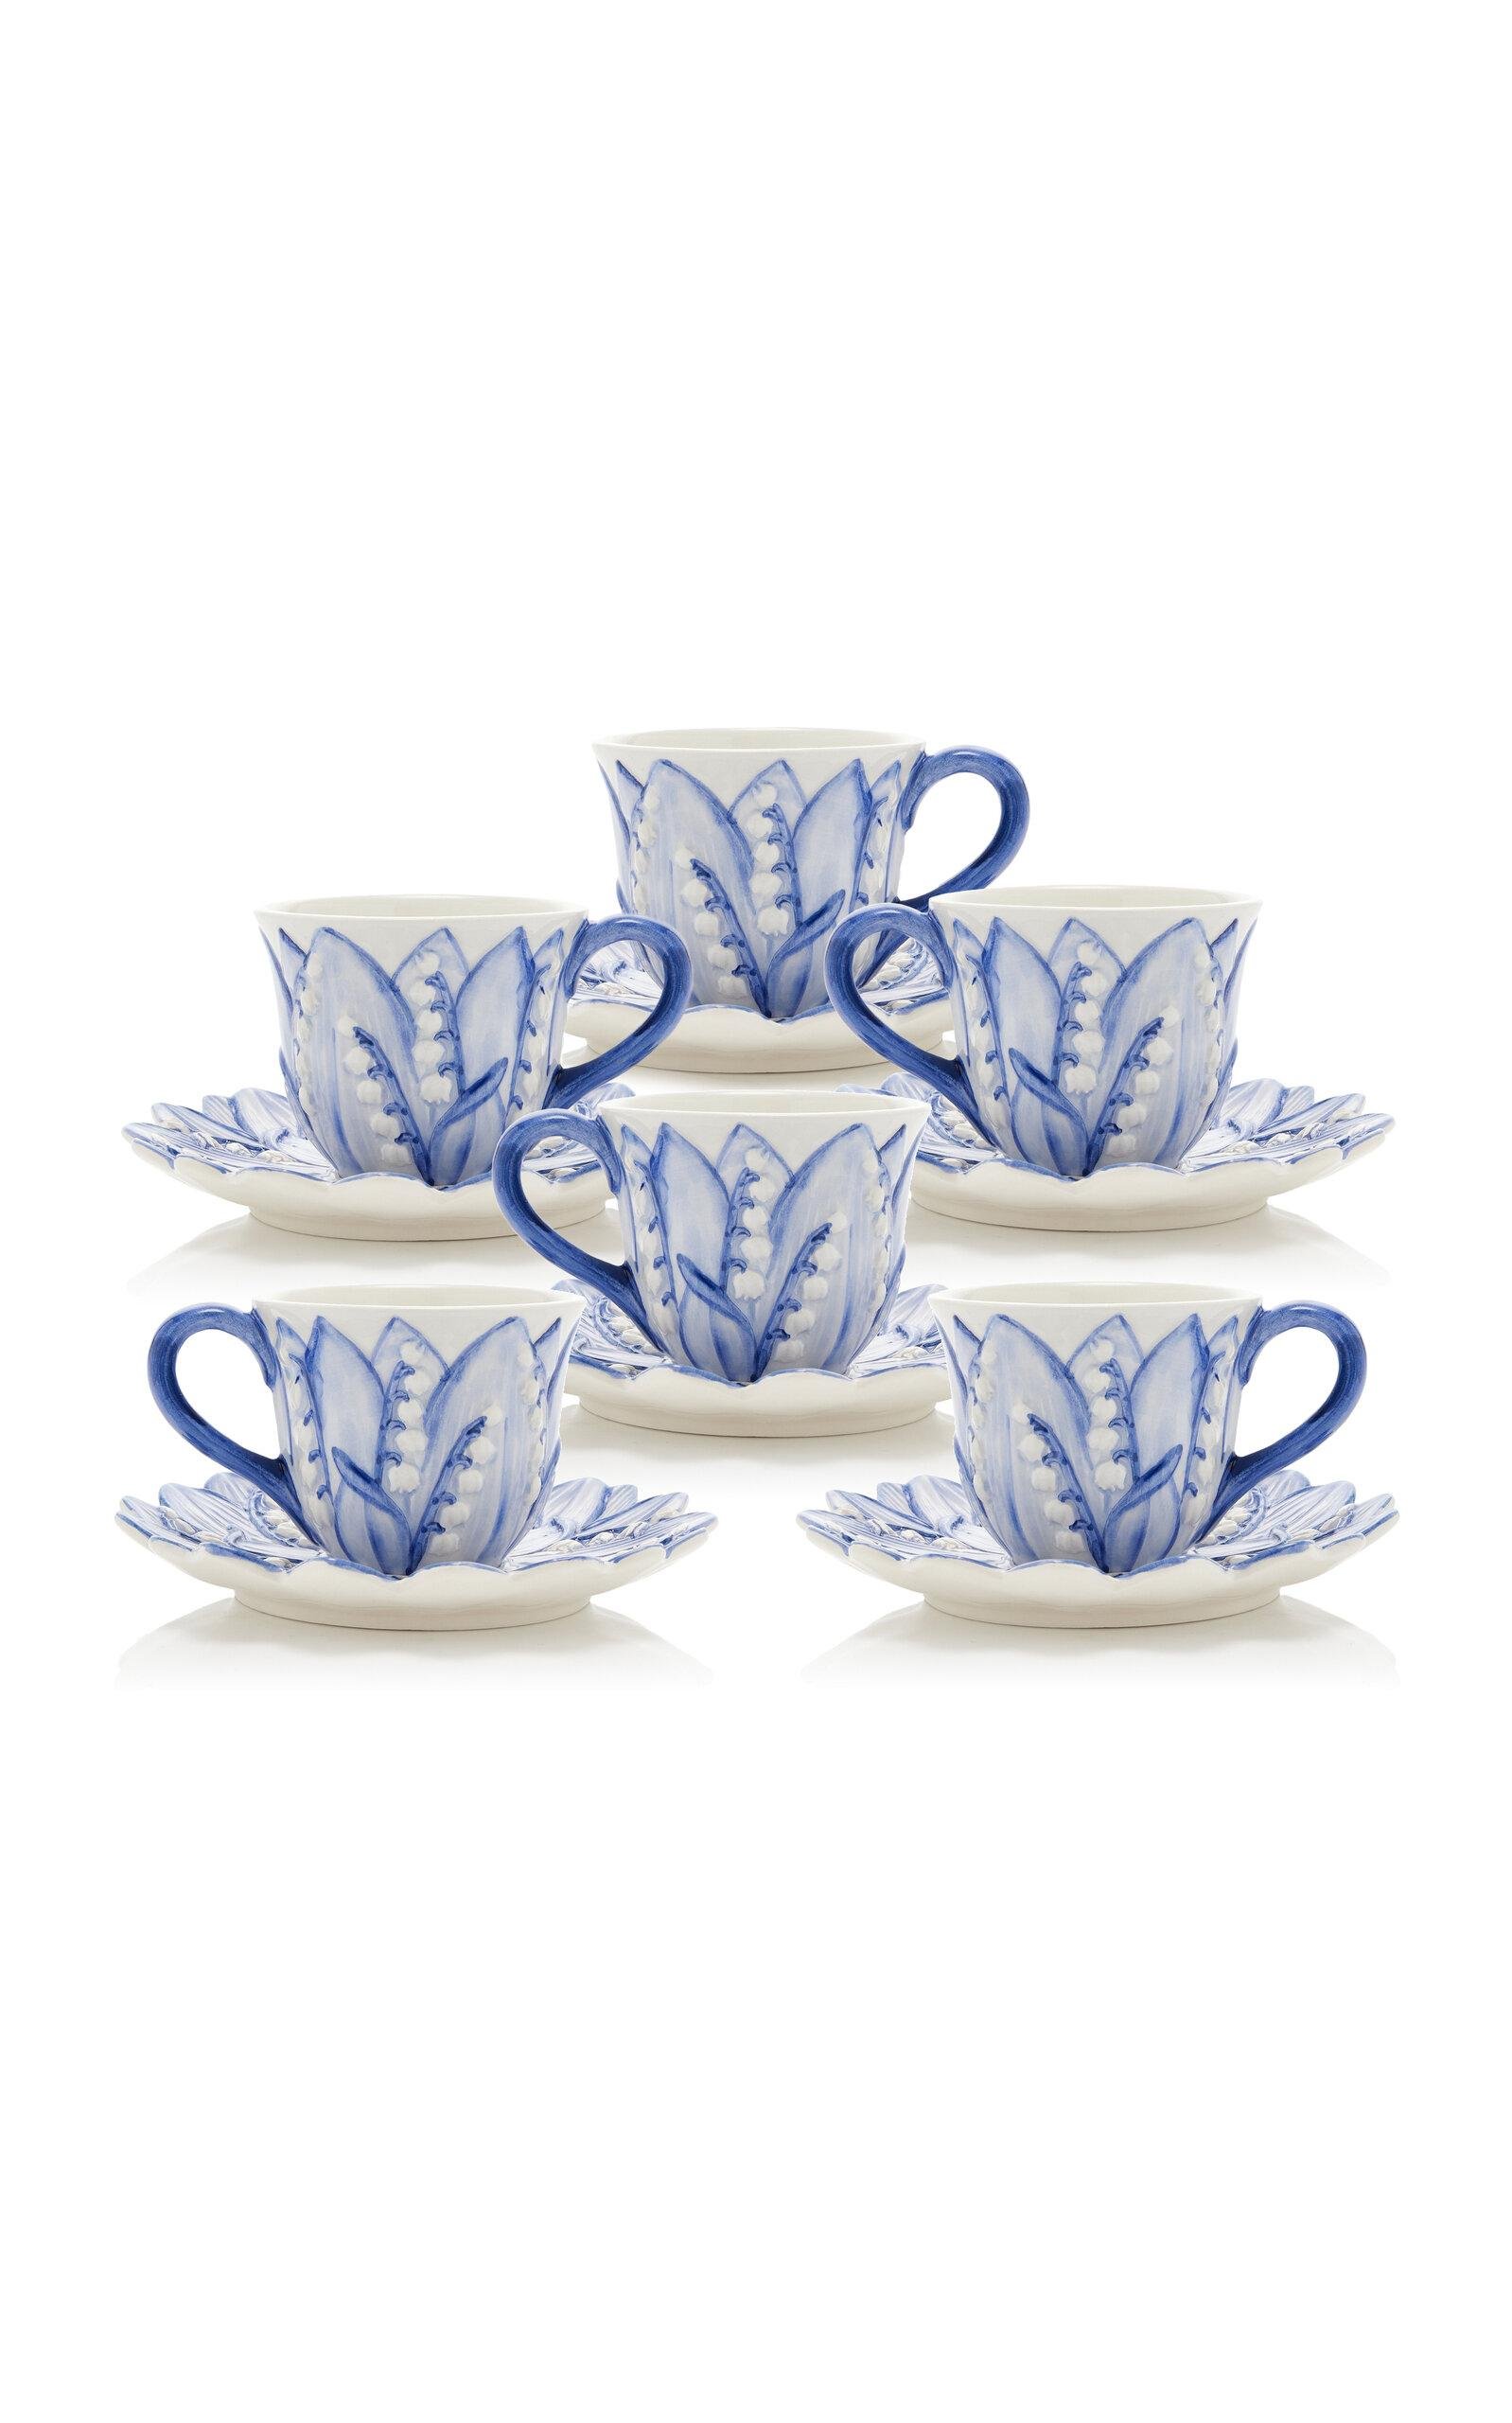 Moda Domus - Set-of-Six Lily of the Valley Ceramic Tea Cup and Saucers - Blue - Moda Operandi by MODA DOMUS